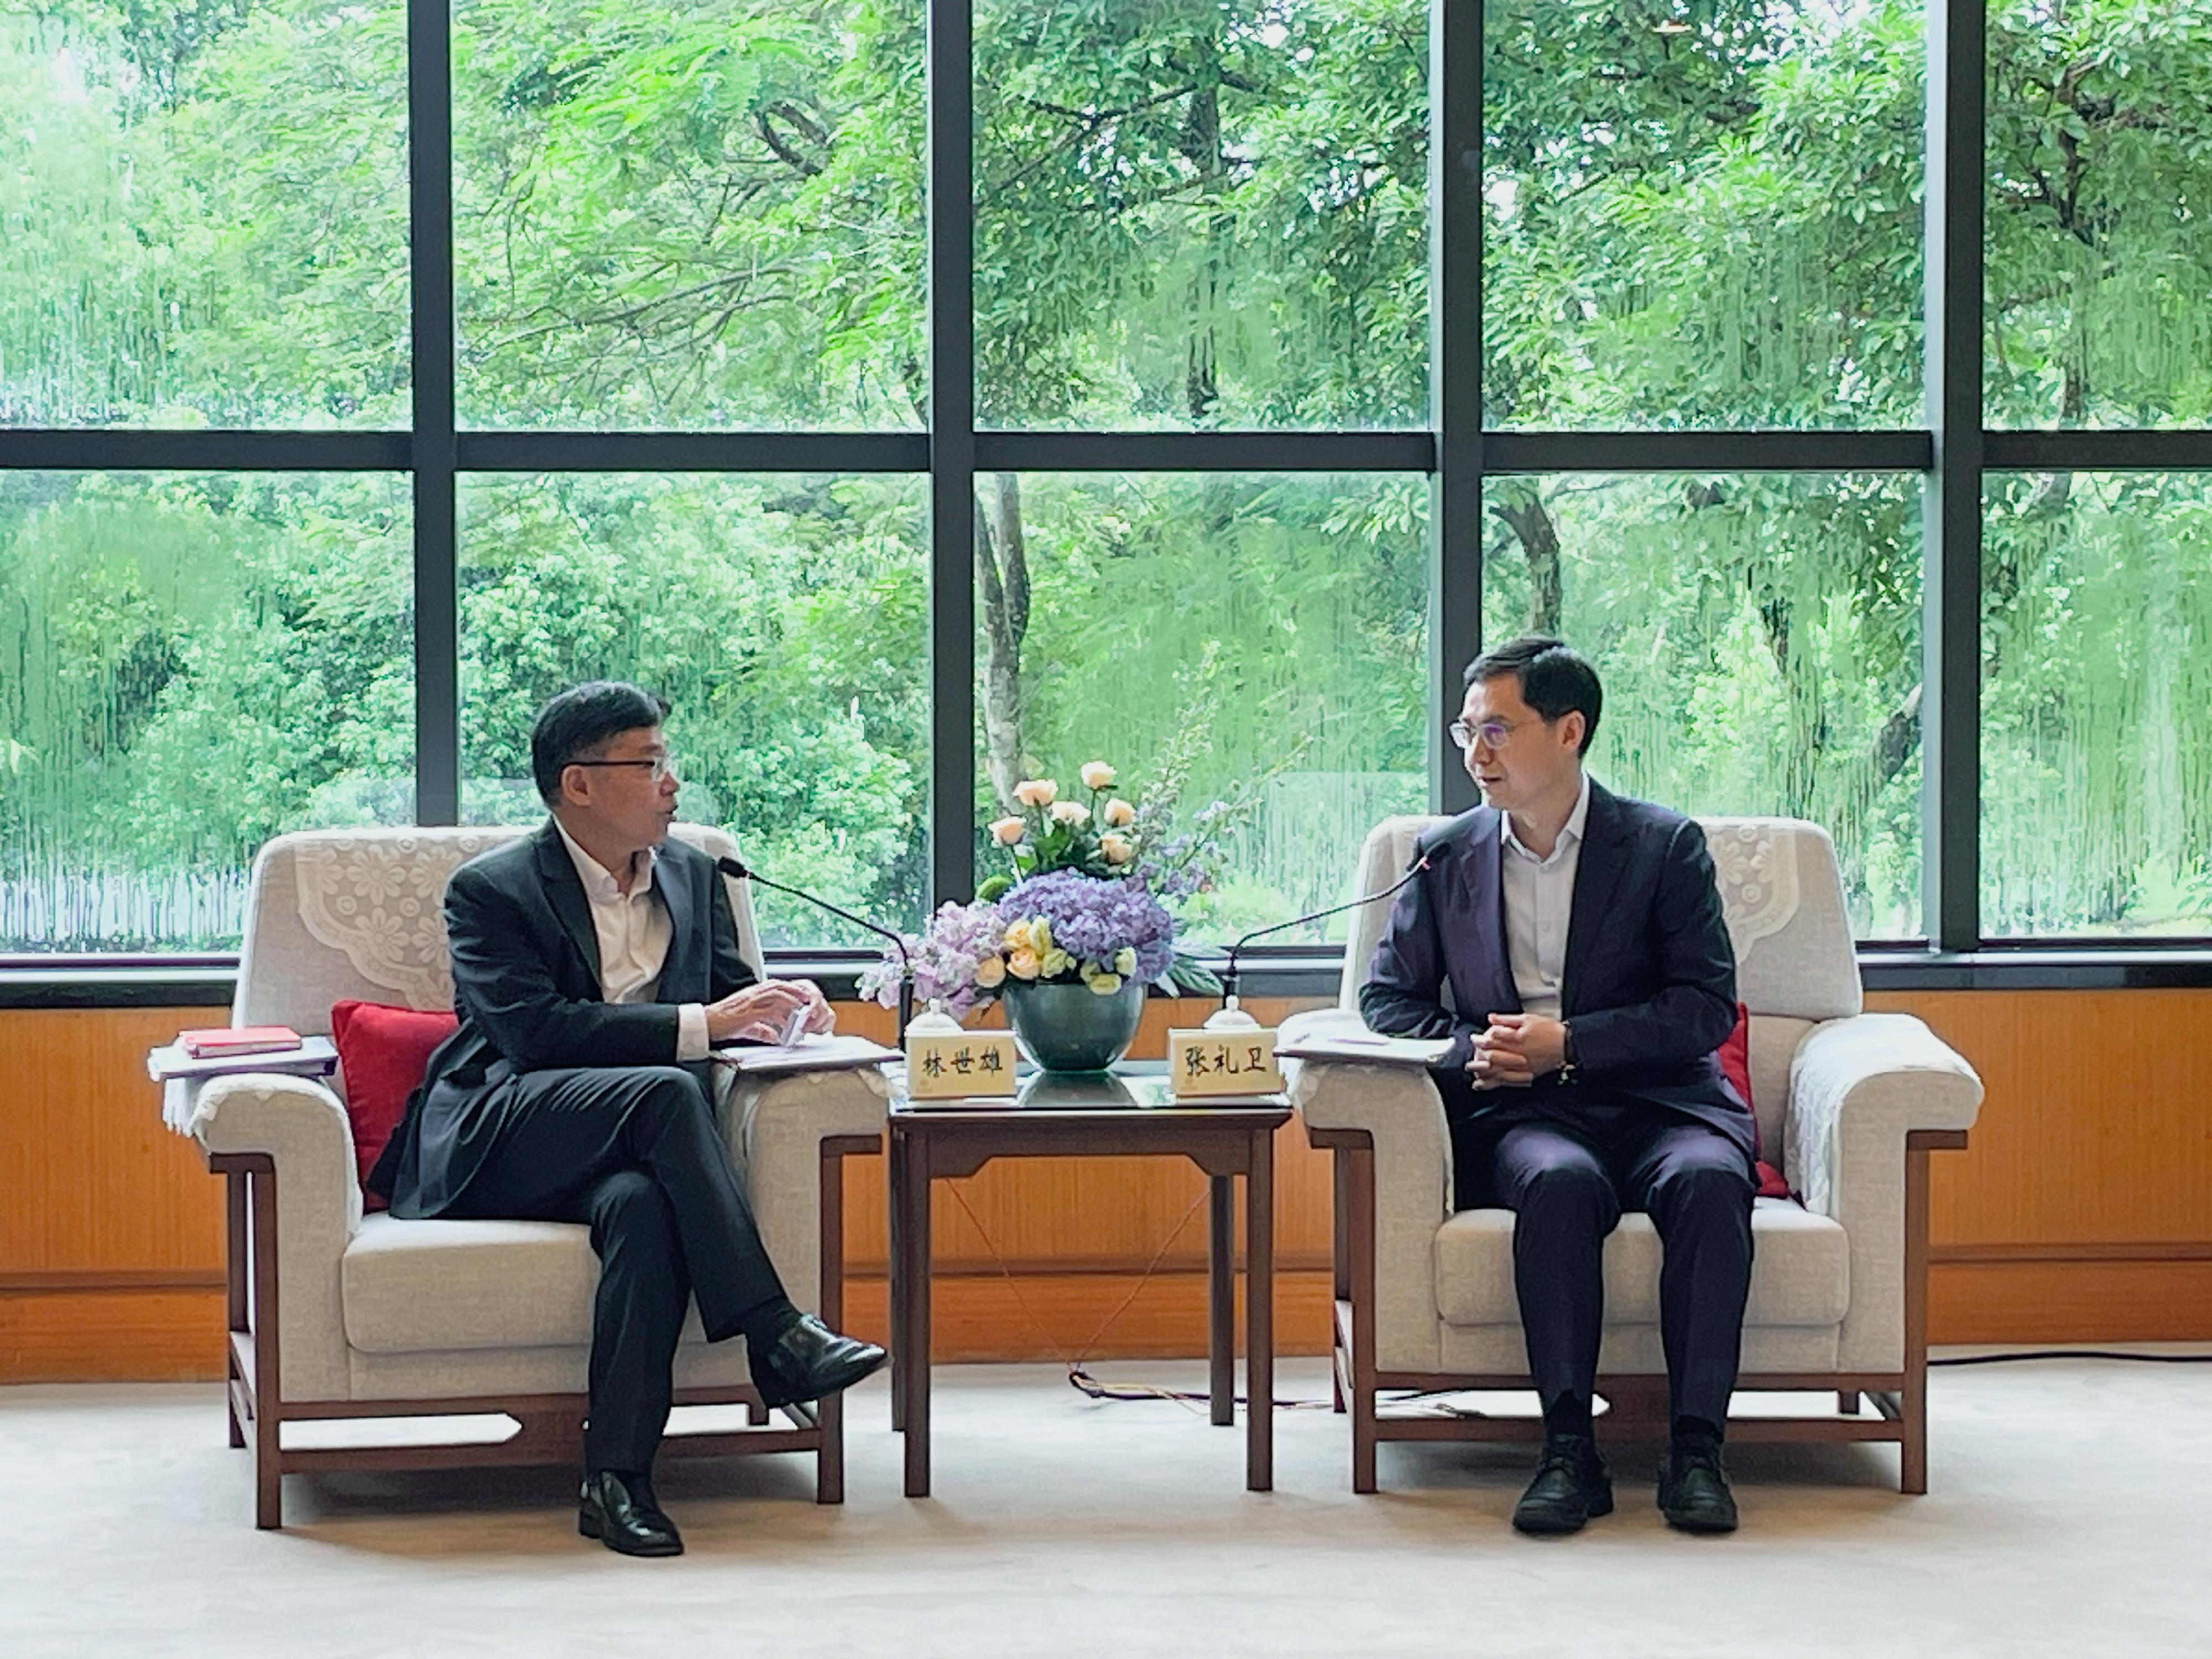 The Secretary for Transport and Logistics, Mr Lam Sai-hung, embarked on a two-day visit to Shenzhen today (July 19) to better understand the latest developments in traffic and transport management, and the autonomous vehicles there. Photo shows Mr Lam (left) paying a call on member of the Party members group of Shenzhen Municipal People's Government Mr Zhang Liwei (right), to exchange views on how to accelerate the interconnection of the transport networks of the Guangdong-Hong Kong-Macao Greater Bay Area and strengthen co-operation in promoting smart transport.